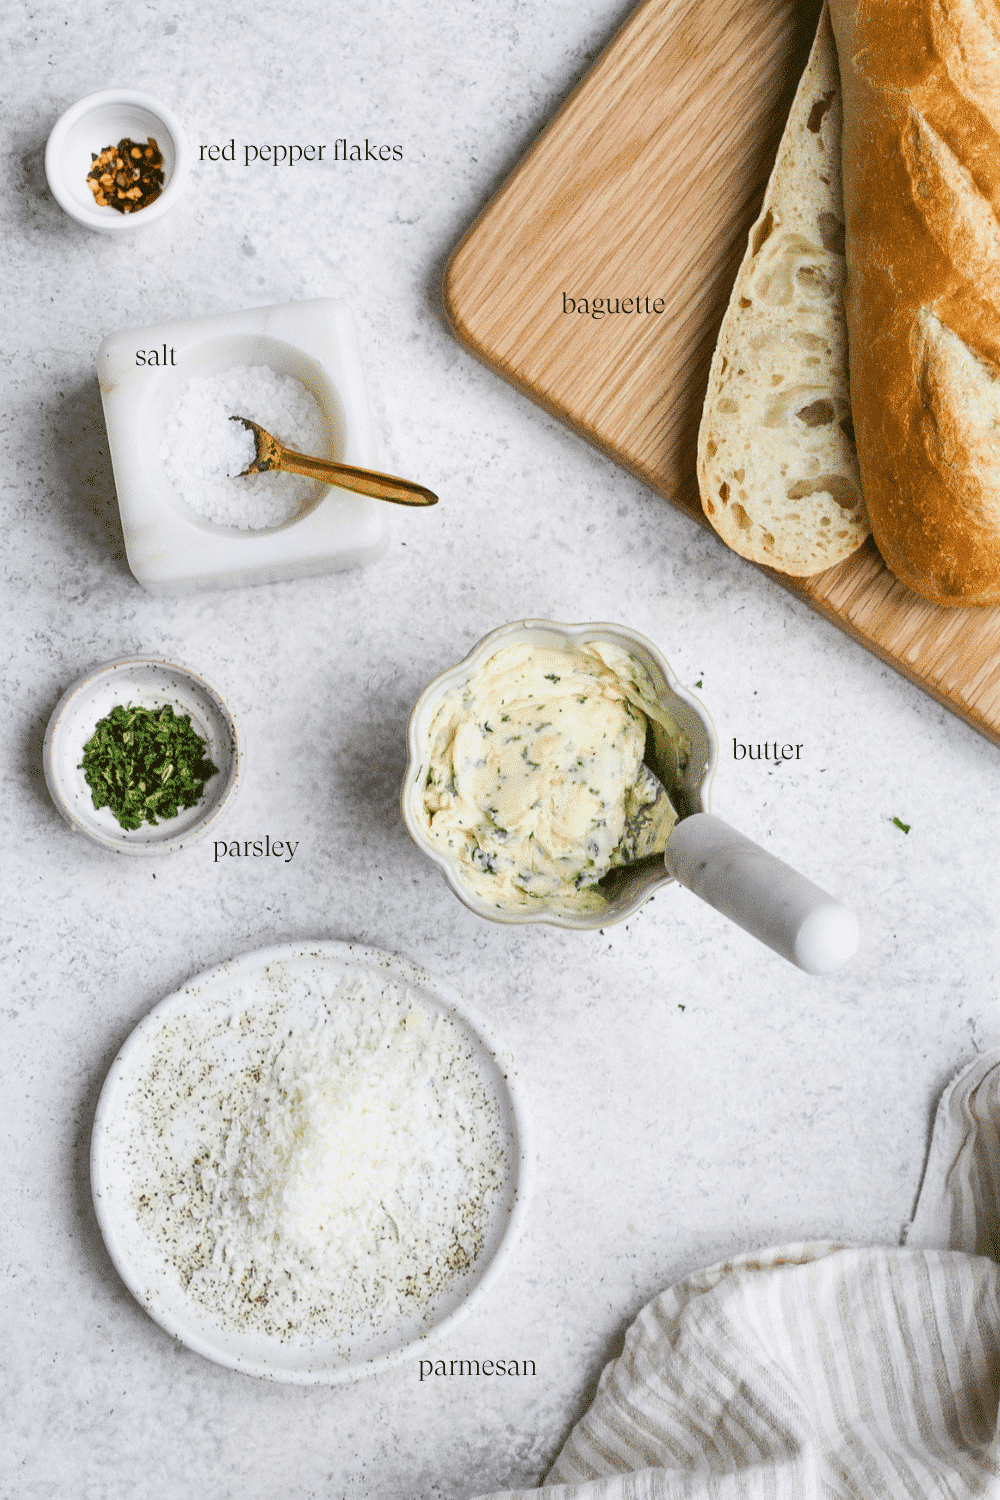 Ingredients for garlic bread arranged on a white countertop.